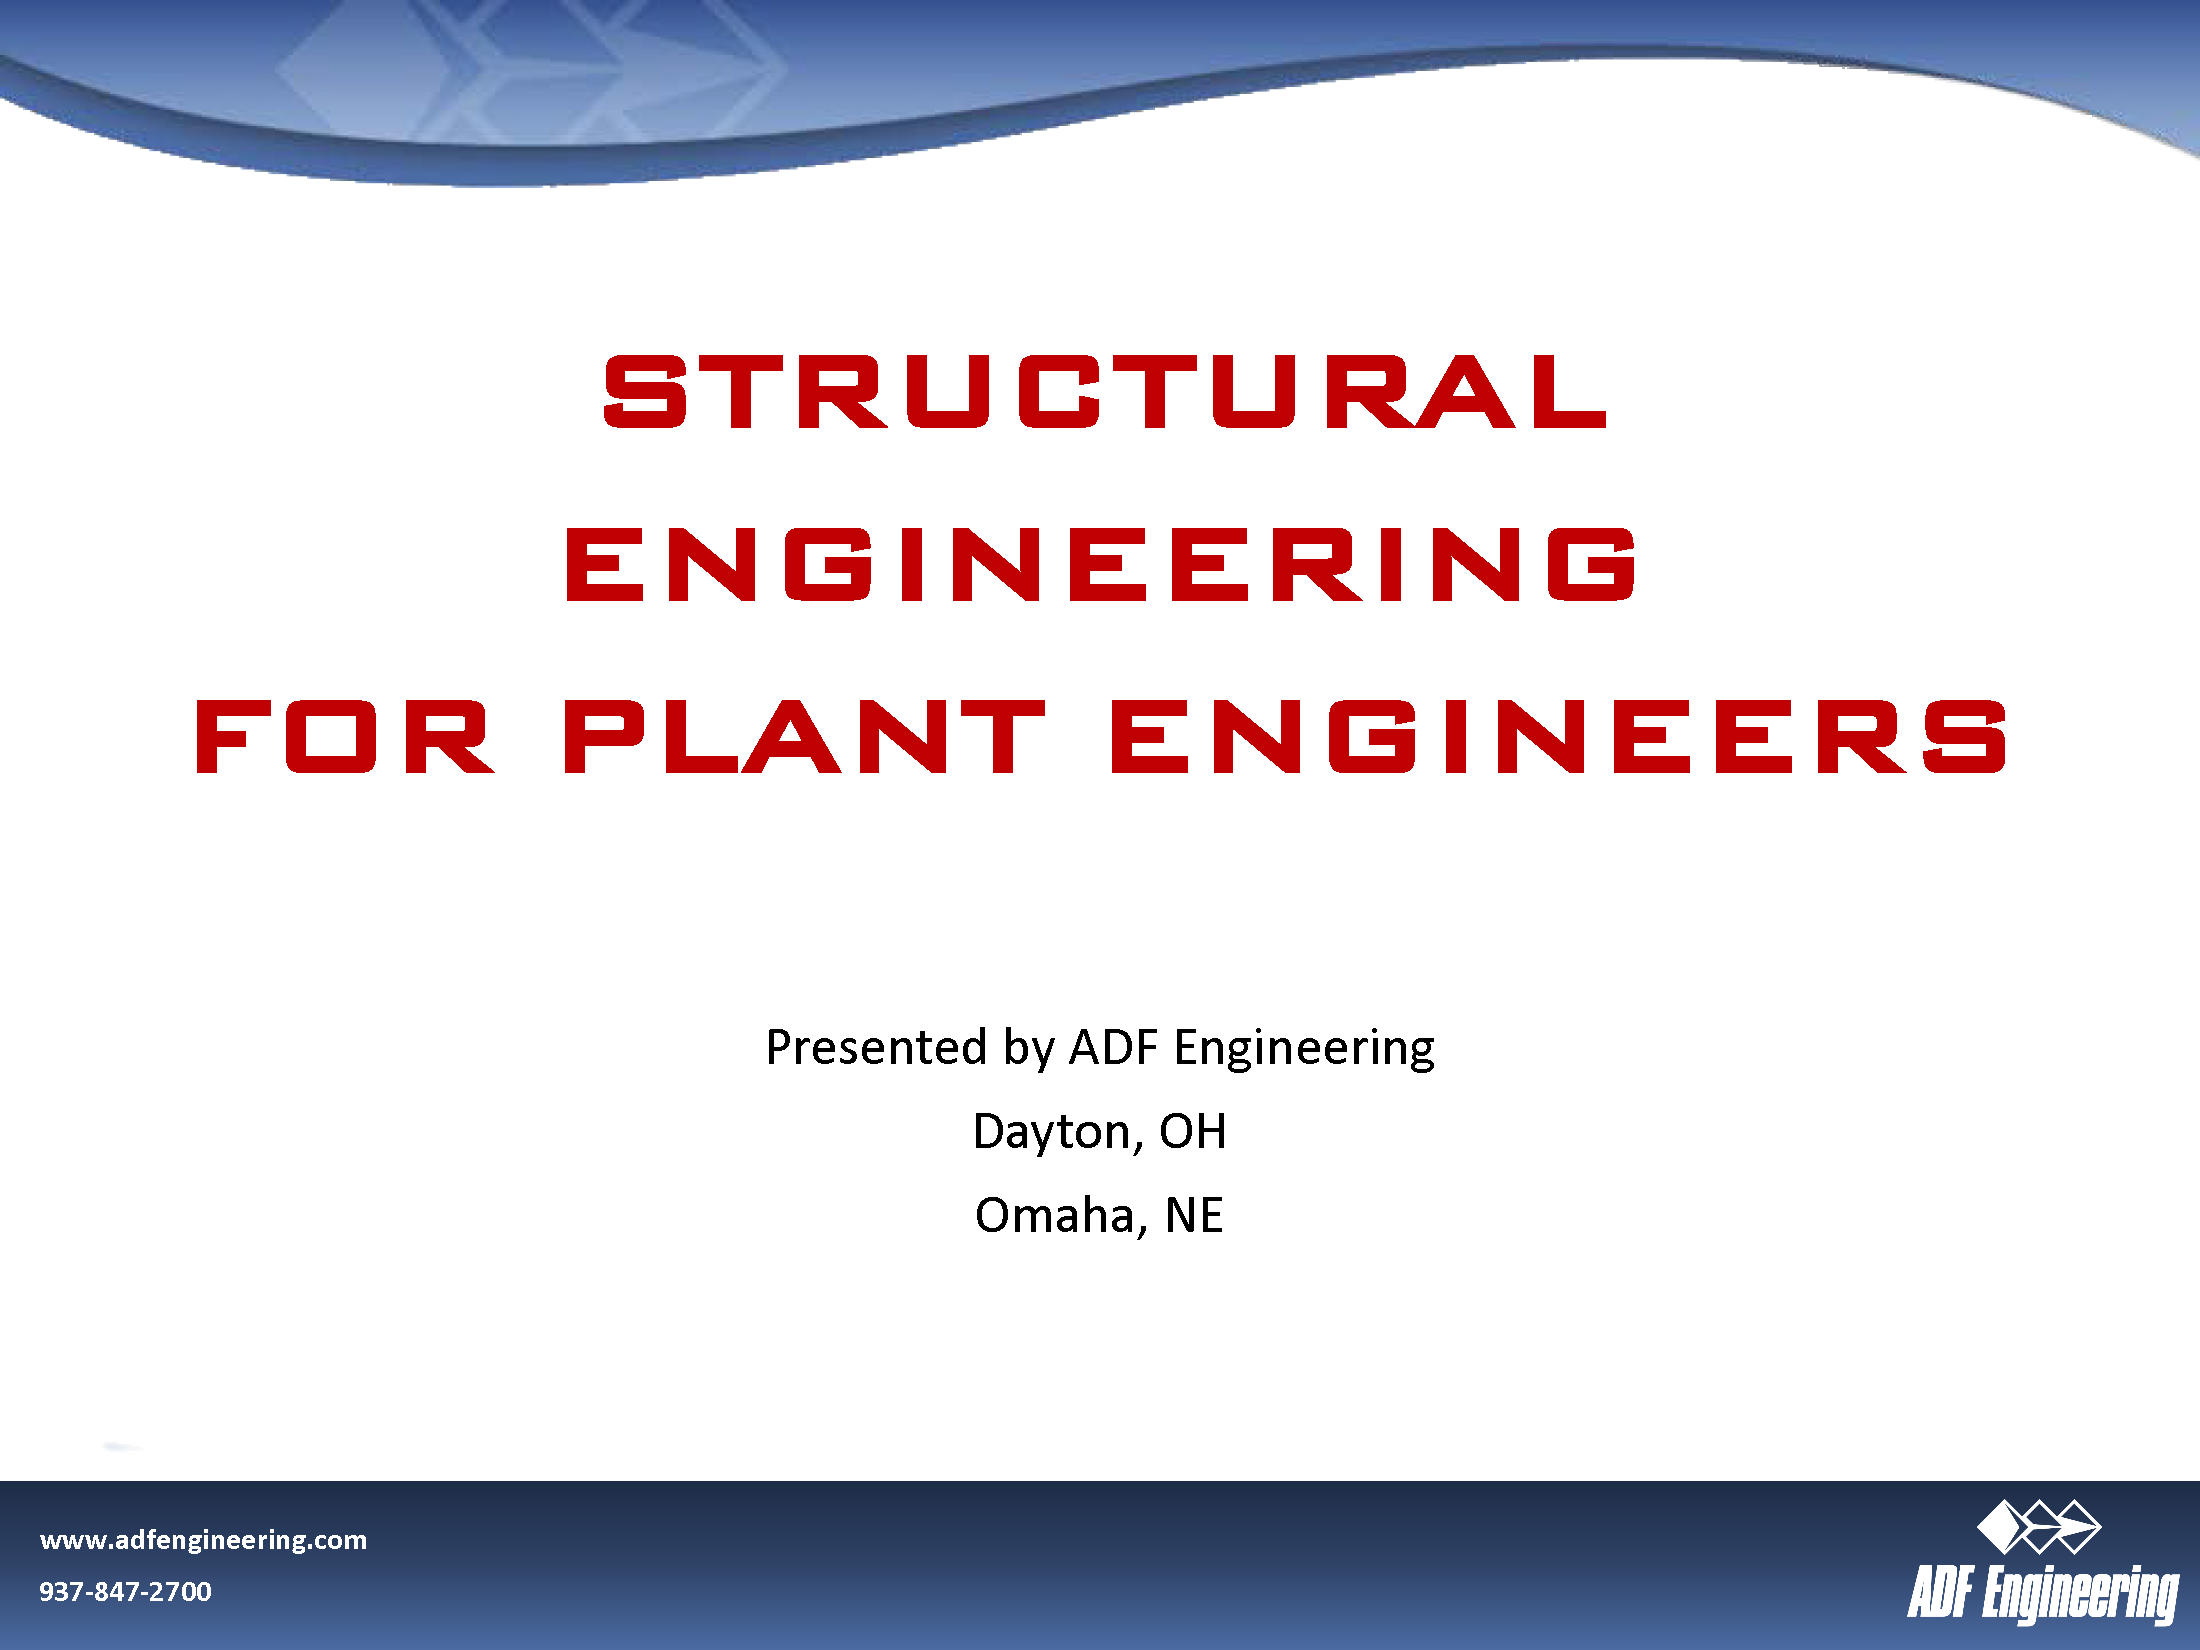 STRUCTURAL ENGINEERING FOR PLANT ENGINEERS